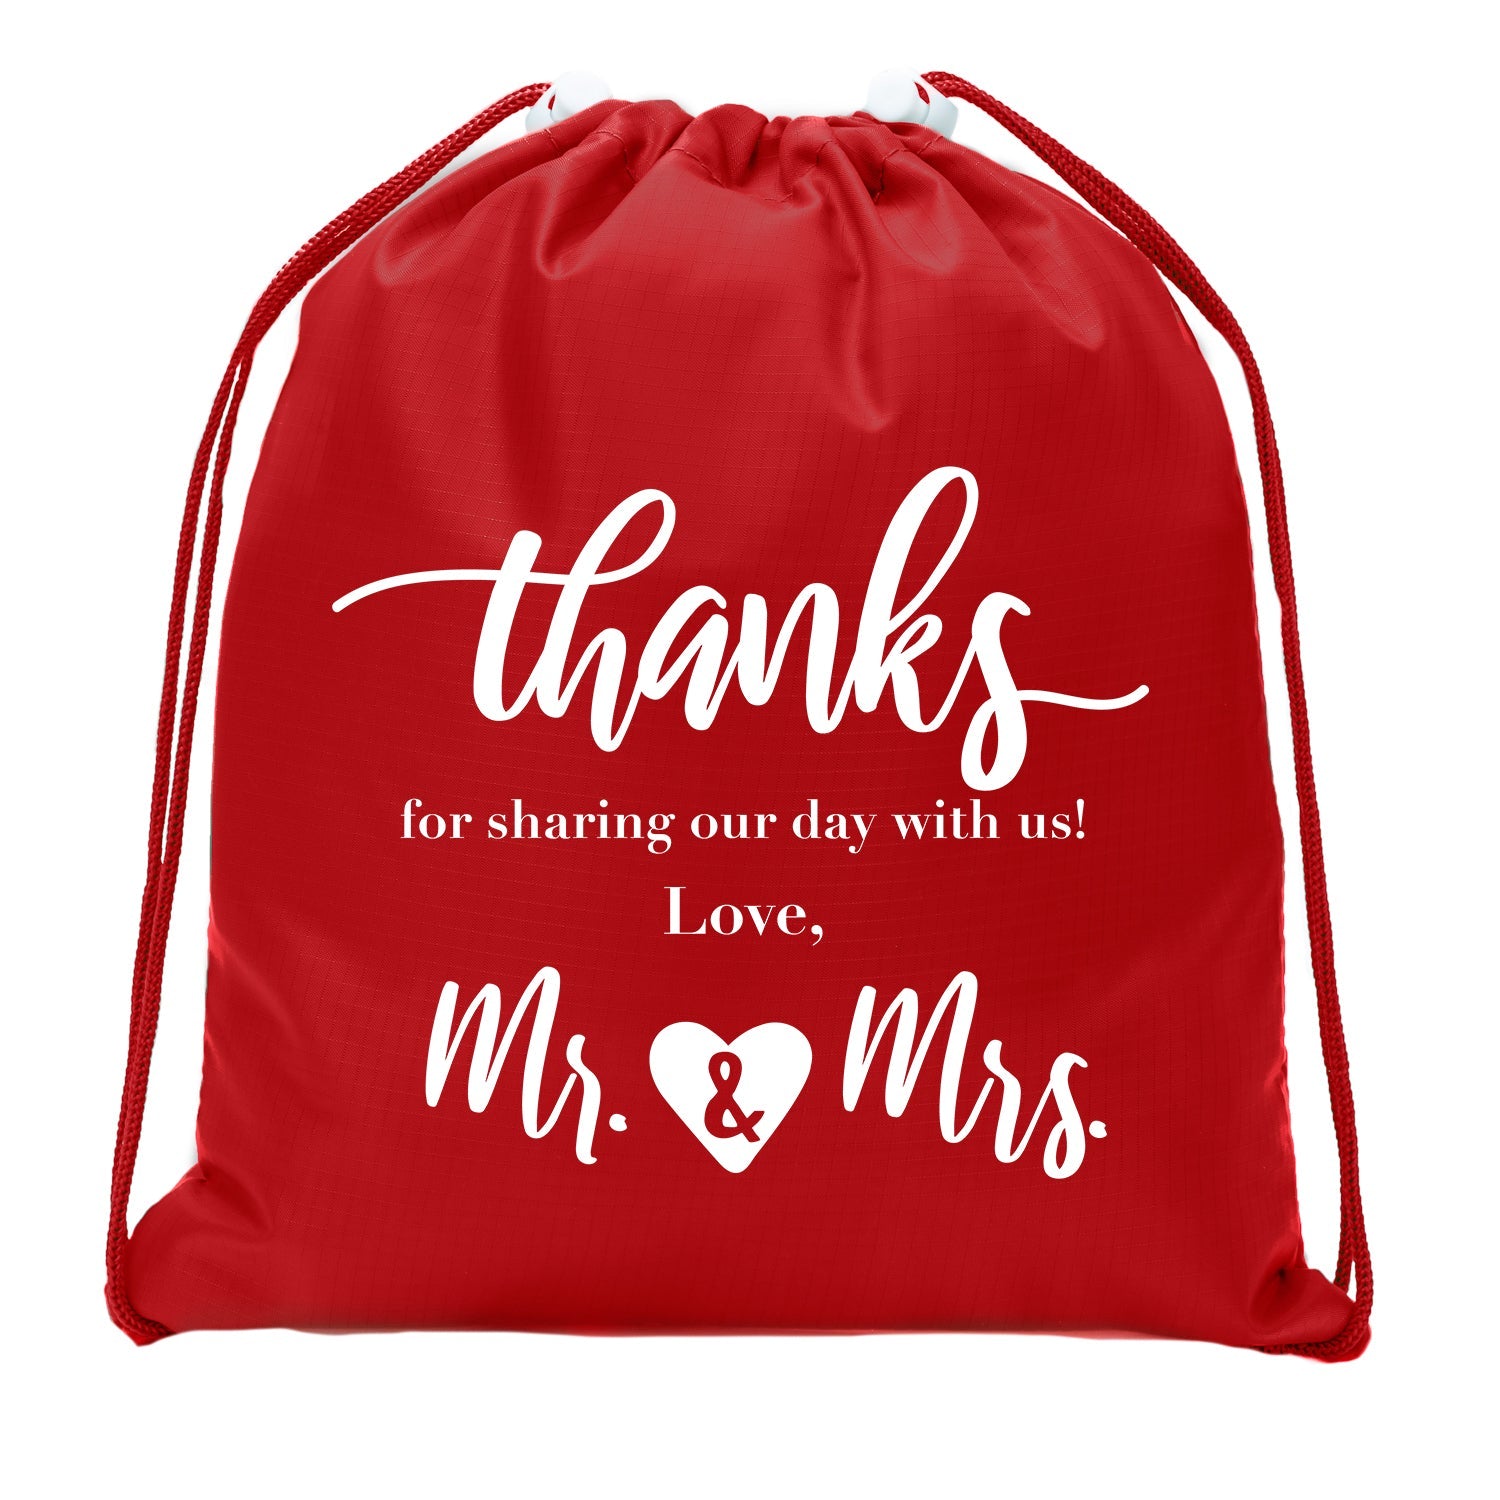 Thanks for Sharing Our Day - Love, Mr. & Mrs. Mini Polyester Drawstring Bag - Mato & Hash